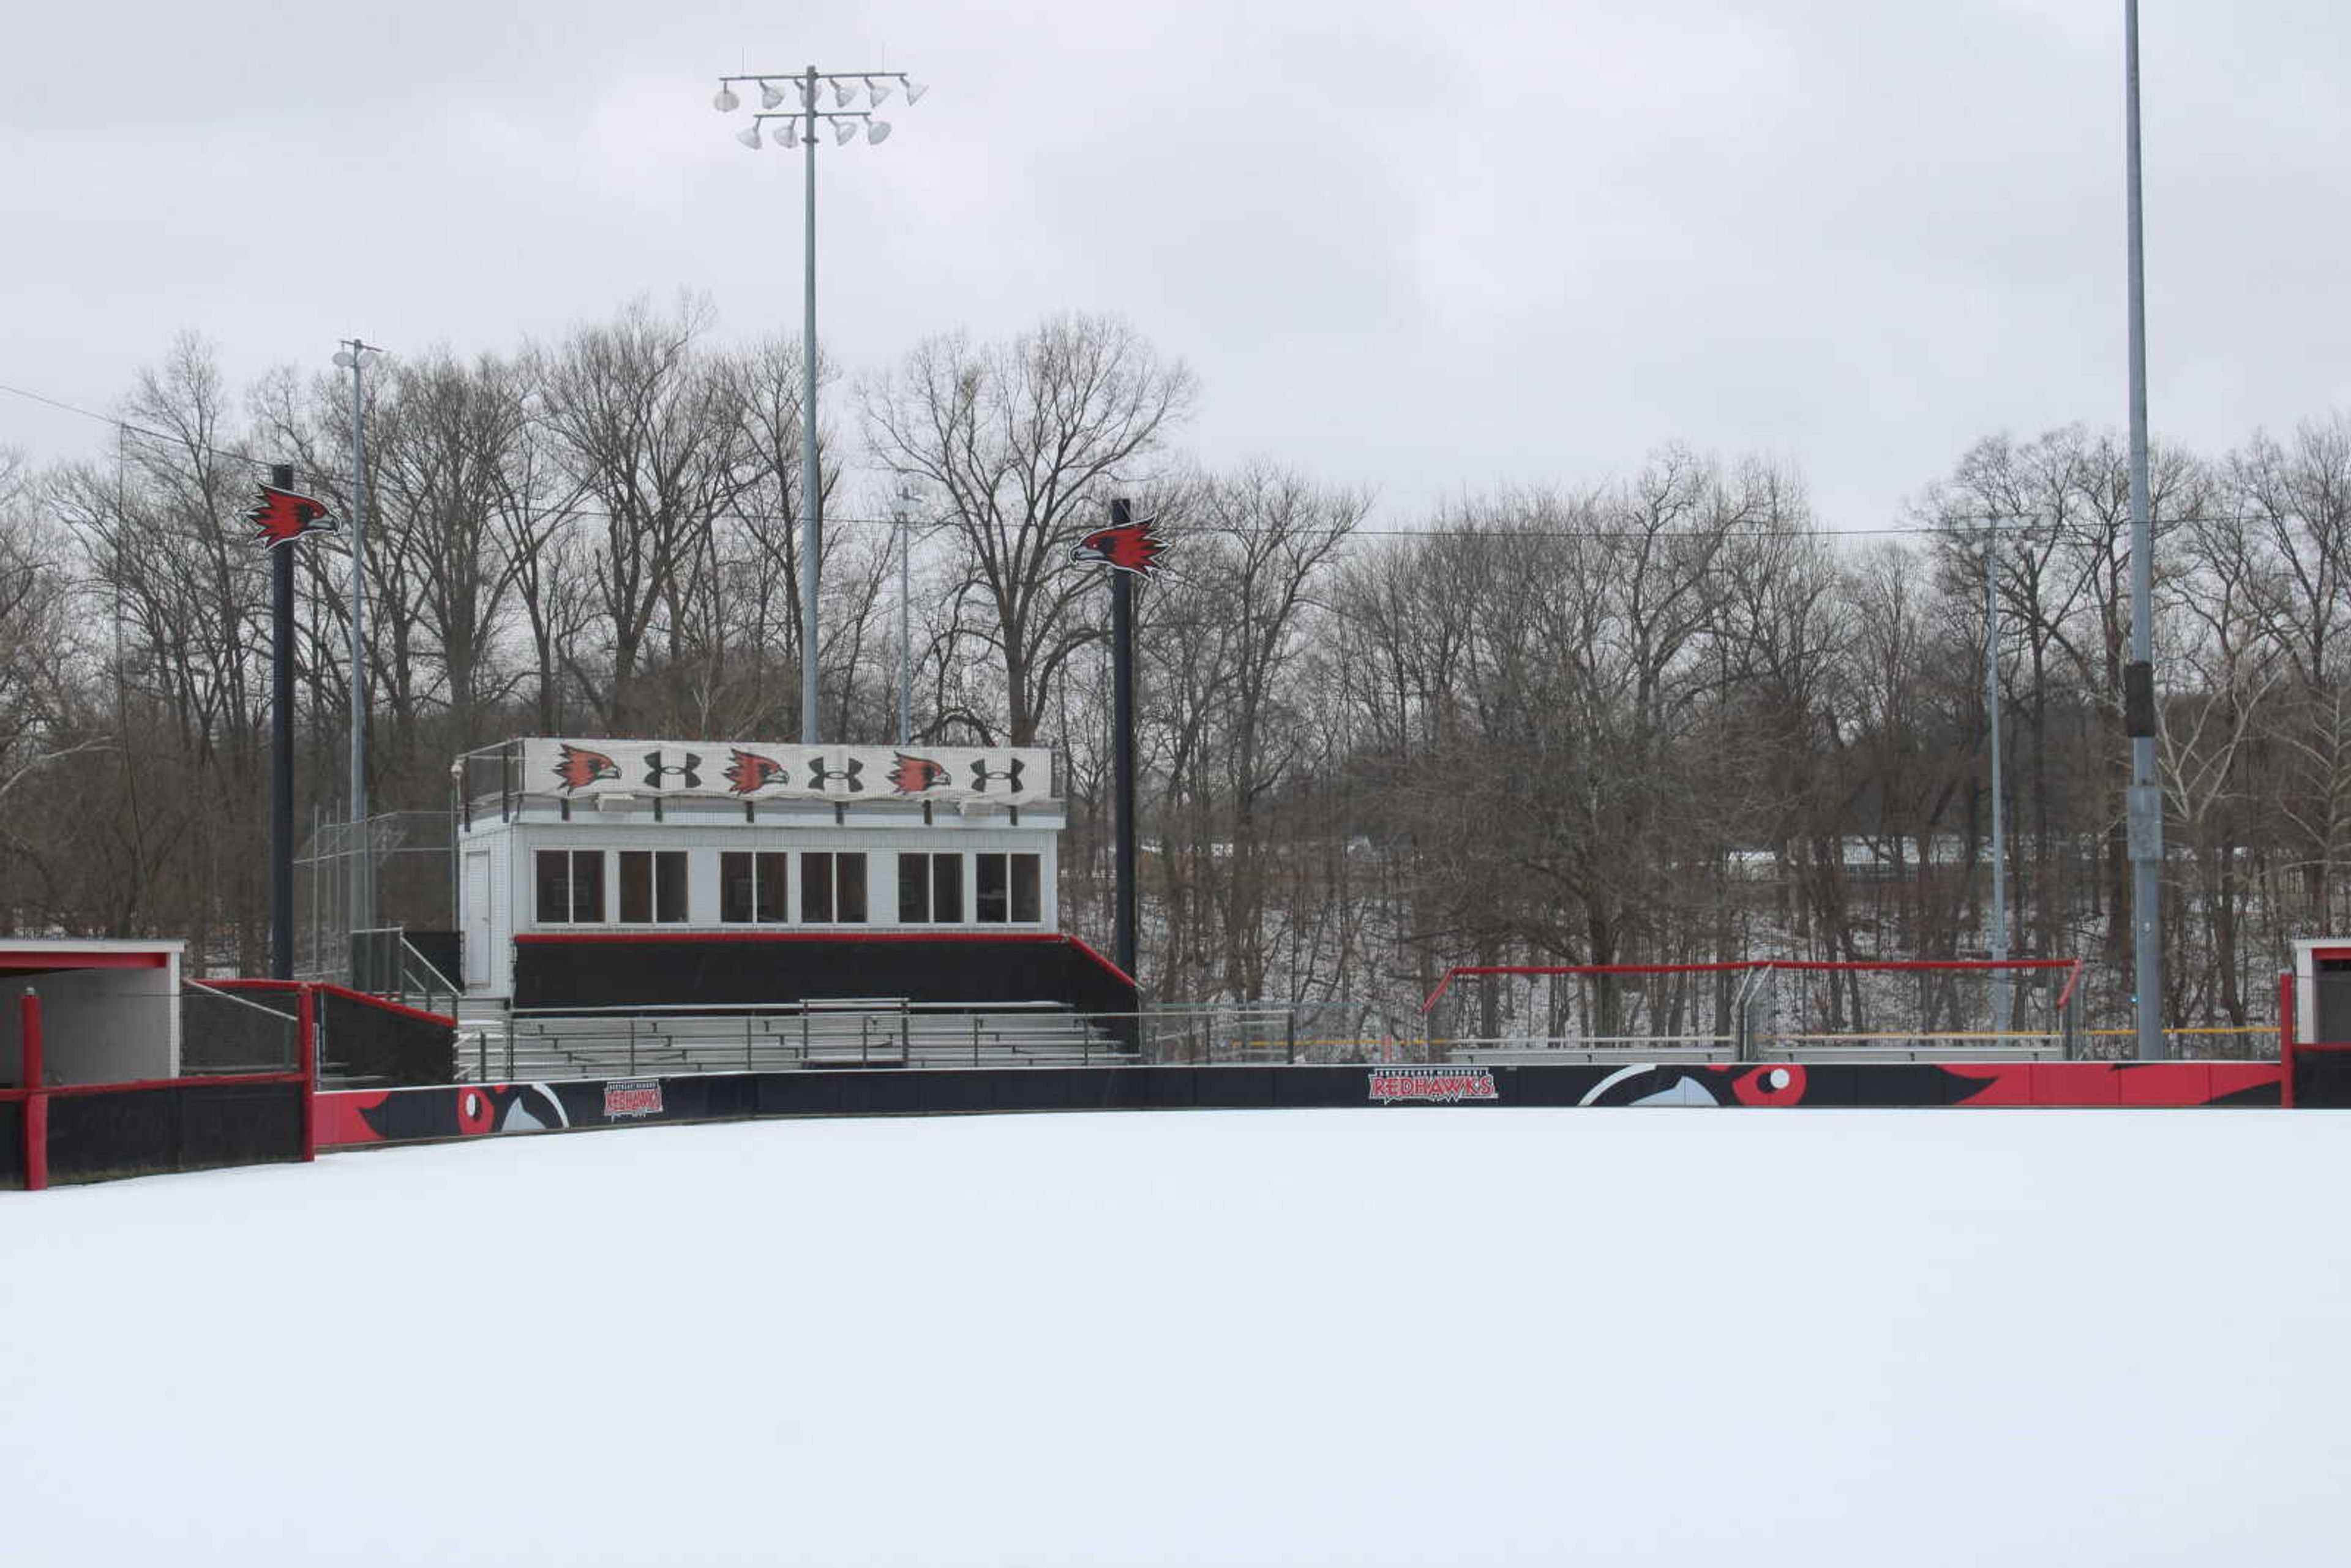 The Southeast softball field rests under an untouched blanket of snow after the winter weather event on Feb. 3. Classes were canceled and campus offices closed due to the inclement weather.